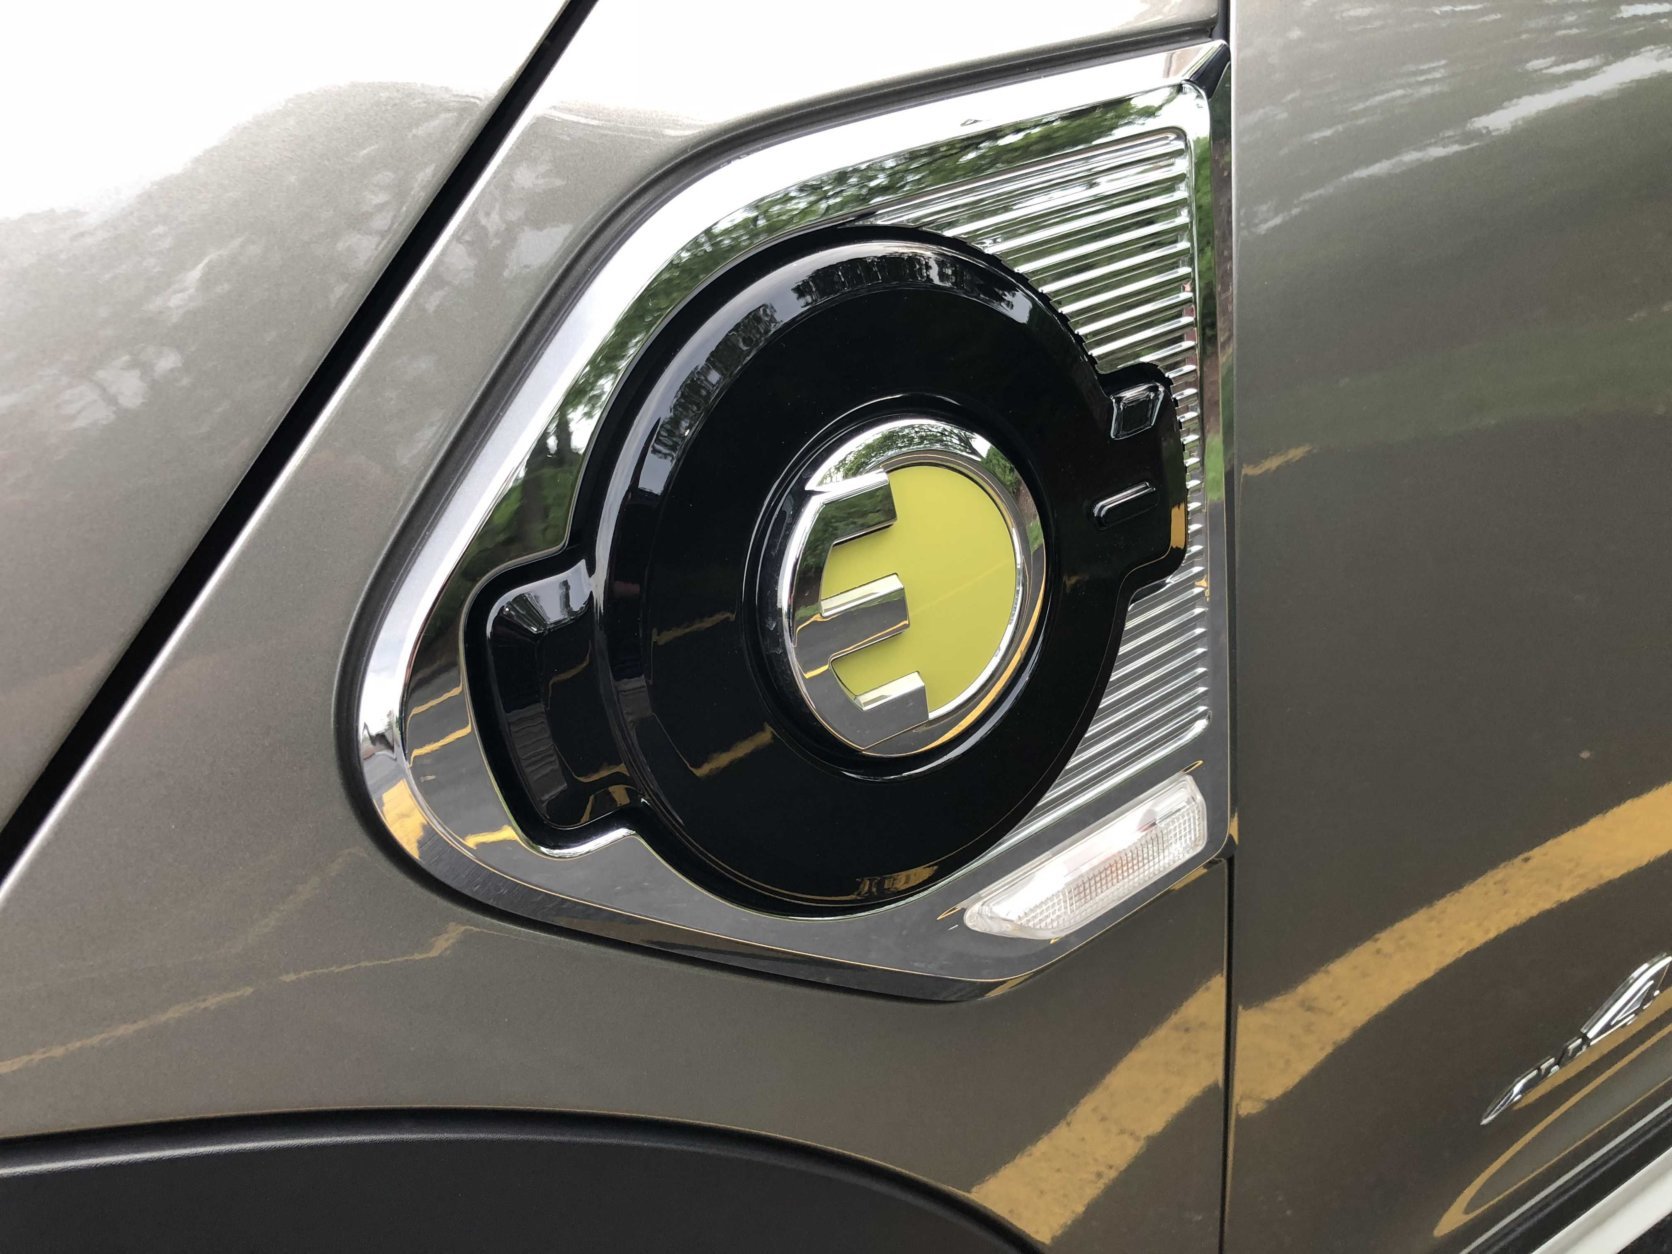 One of the few stylistic giveaways that this is the hybrid version of the Countryman is this 'E' on the plug-in slot (WTOP/Mike Parris)